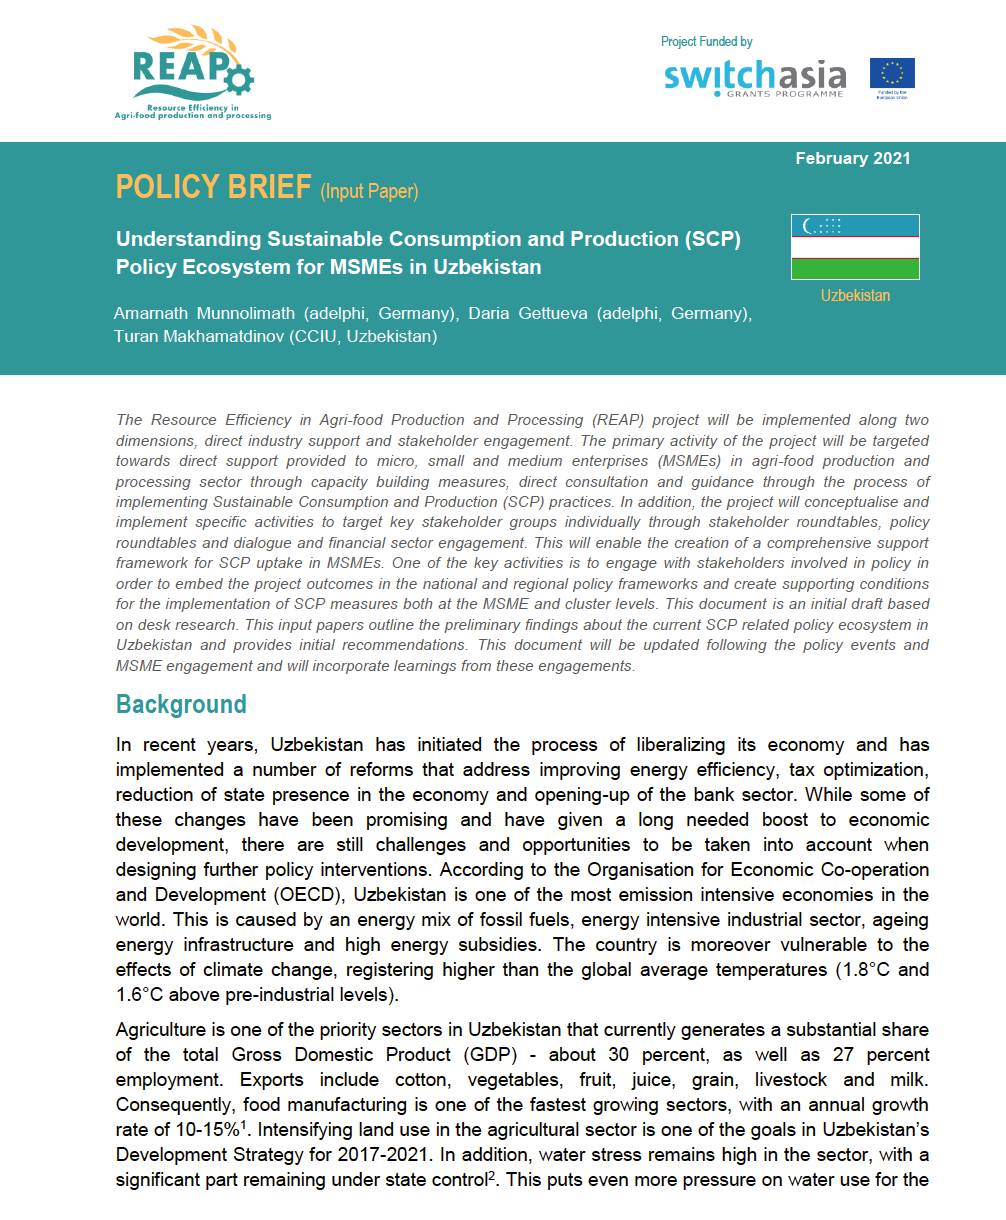 Policy Brief: Understanding SCP Policy Ecosystem for MSMEs in Uzbekistan